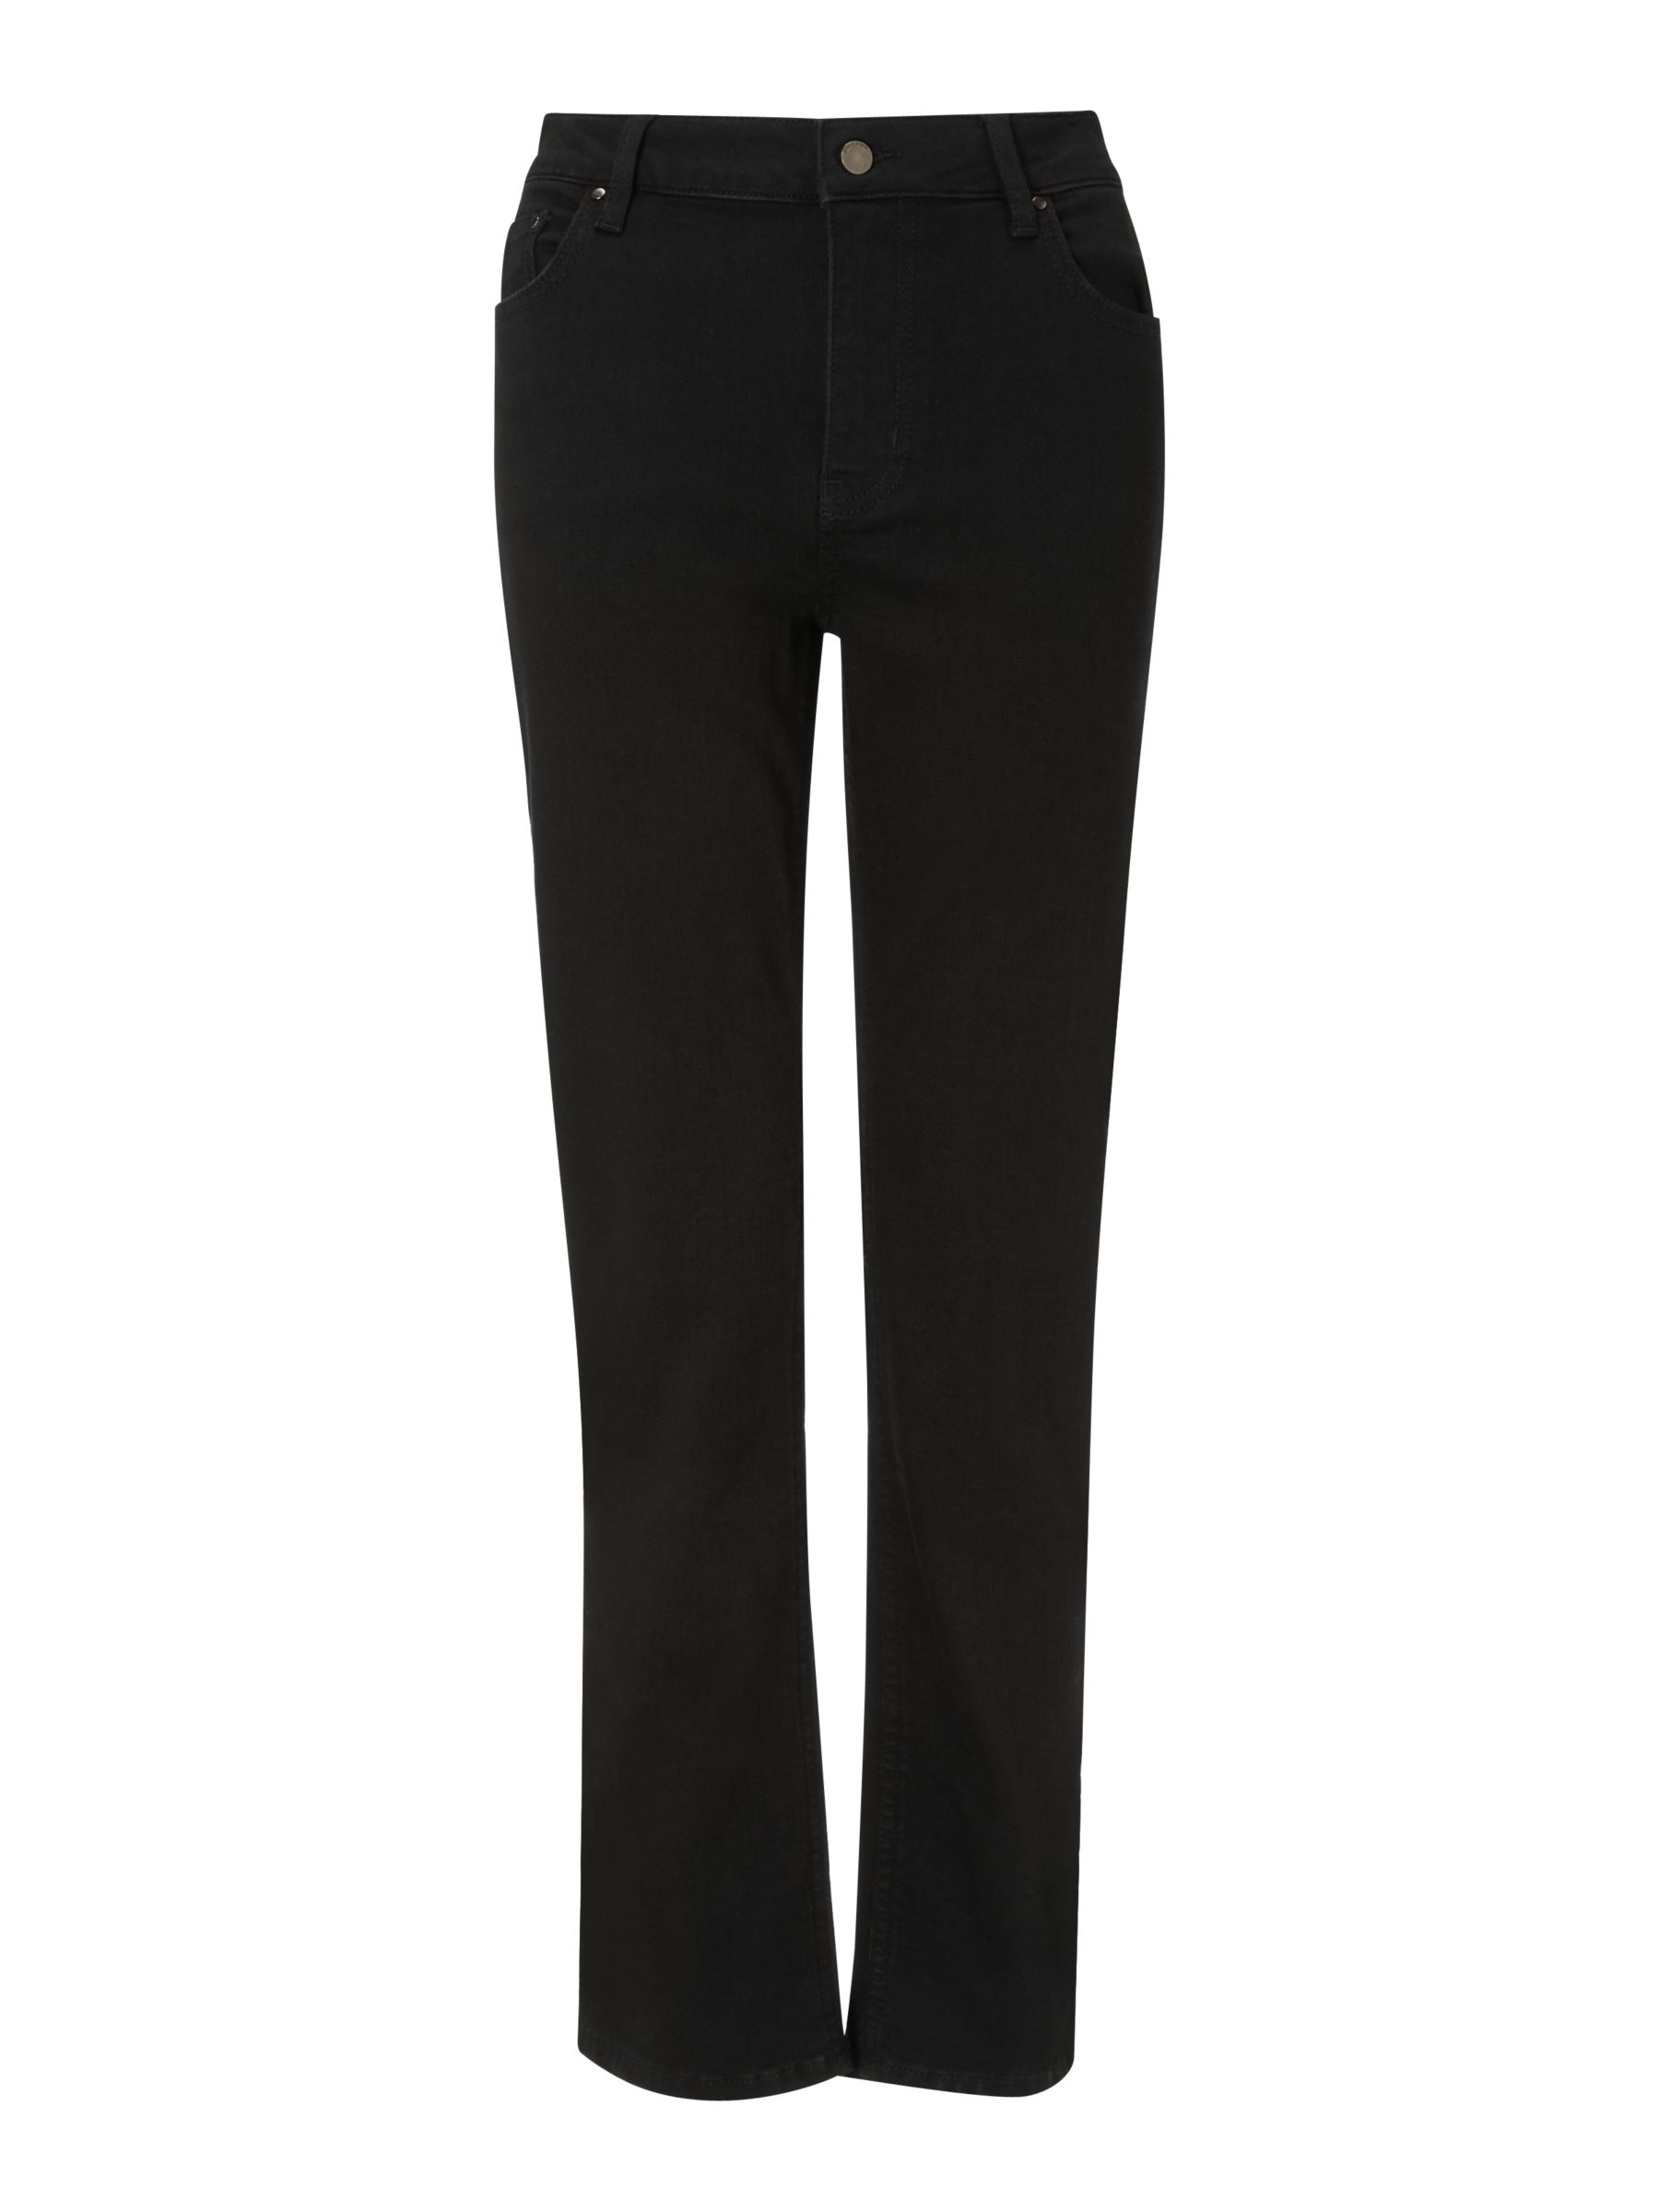 Boden Slim-Fit Straight Jeans, Black at John Lewis & Partners